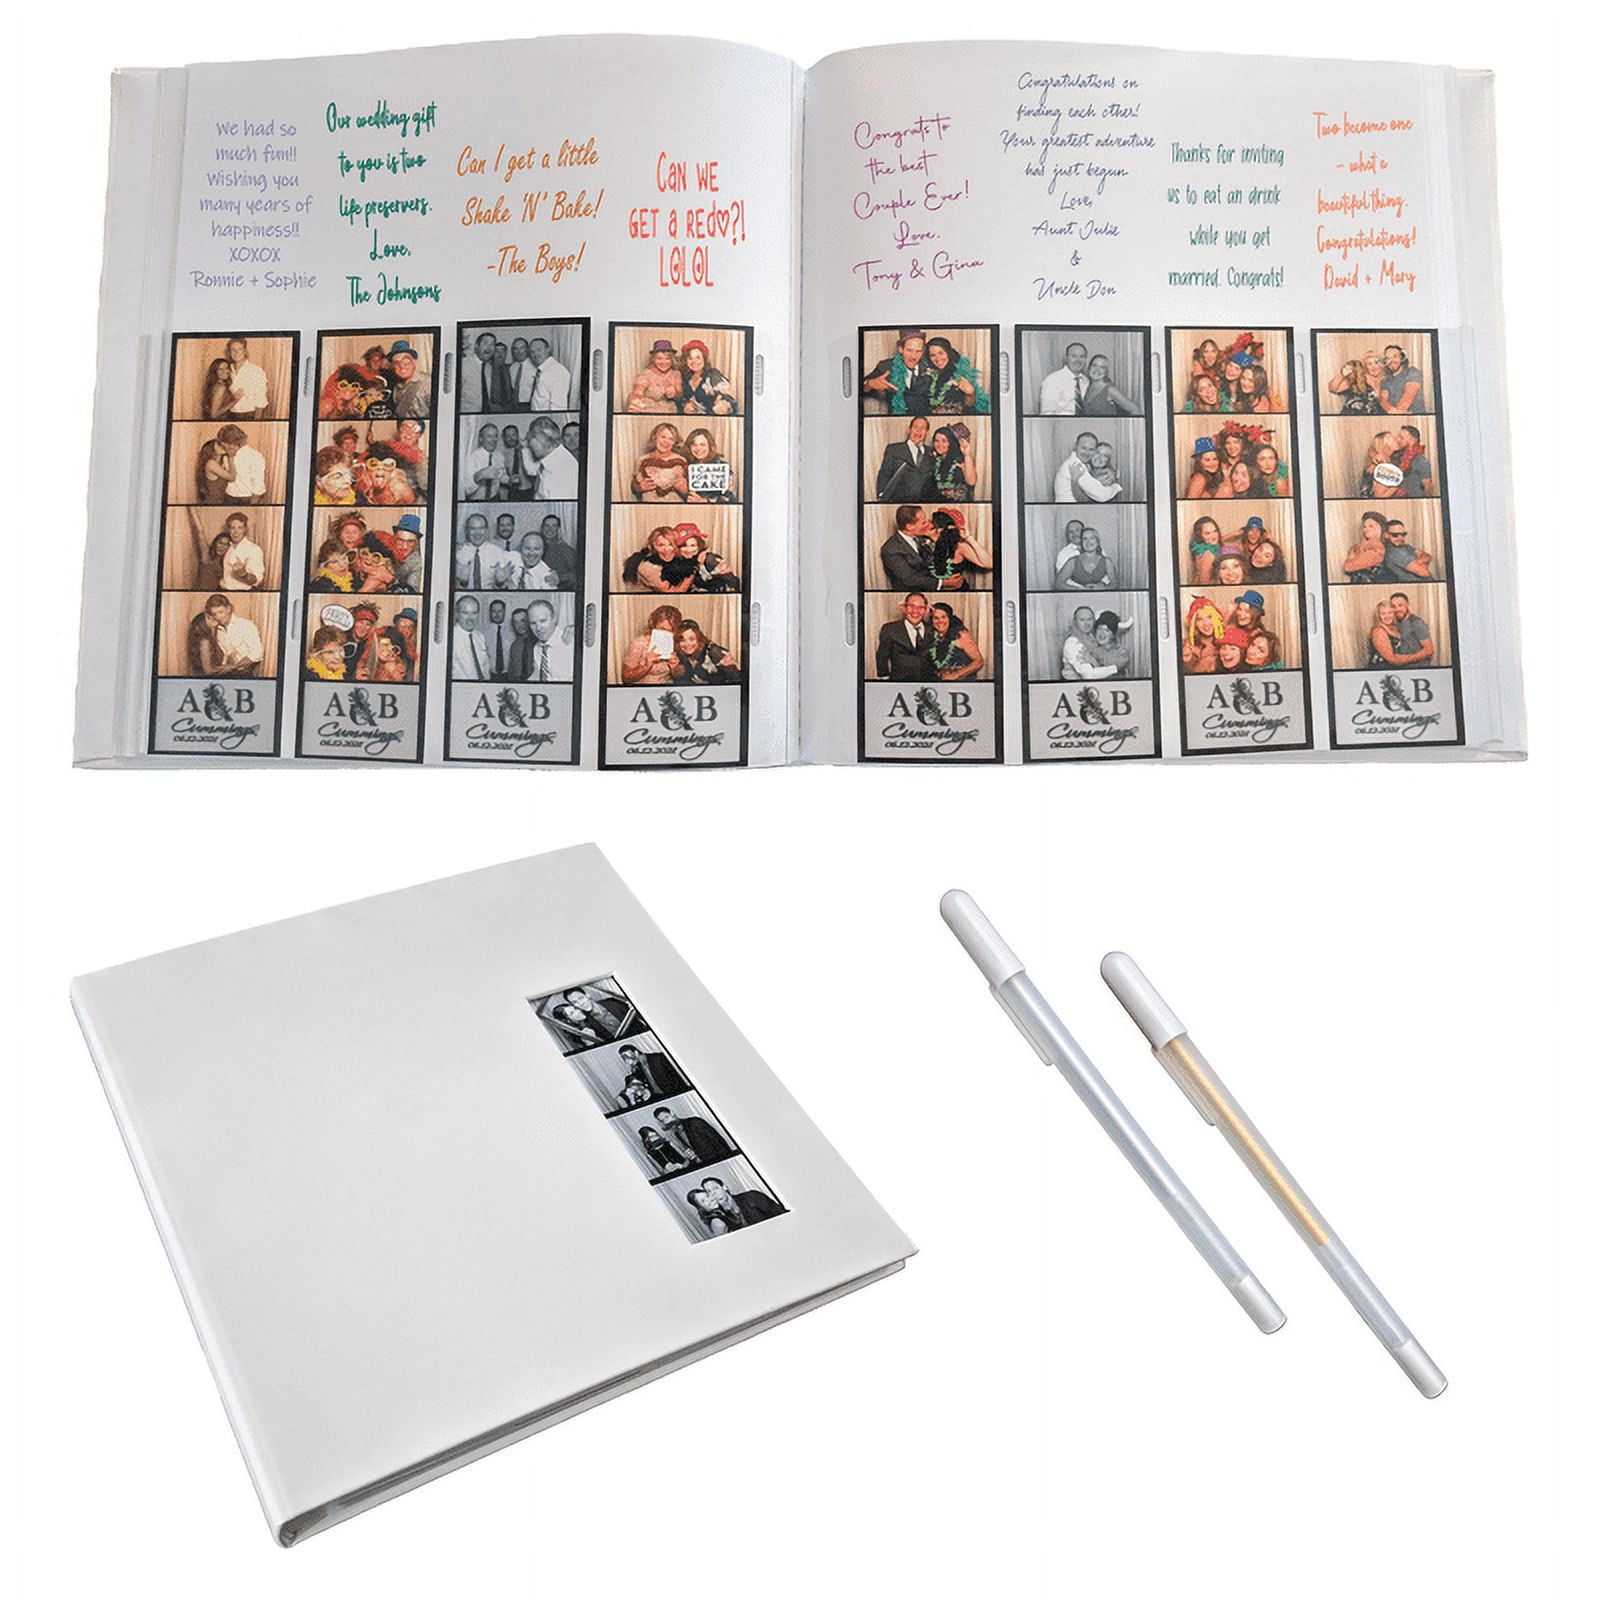 Photo Booth Scrapbook Album with Gel Pens White Cover, White